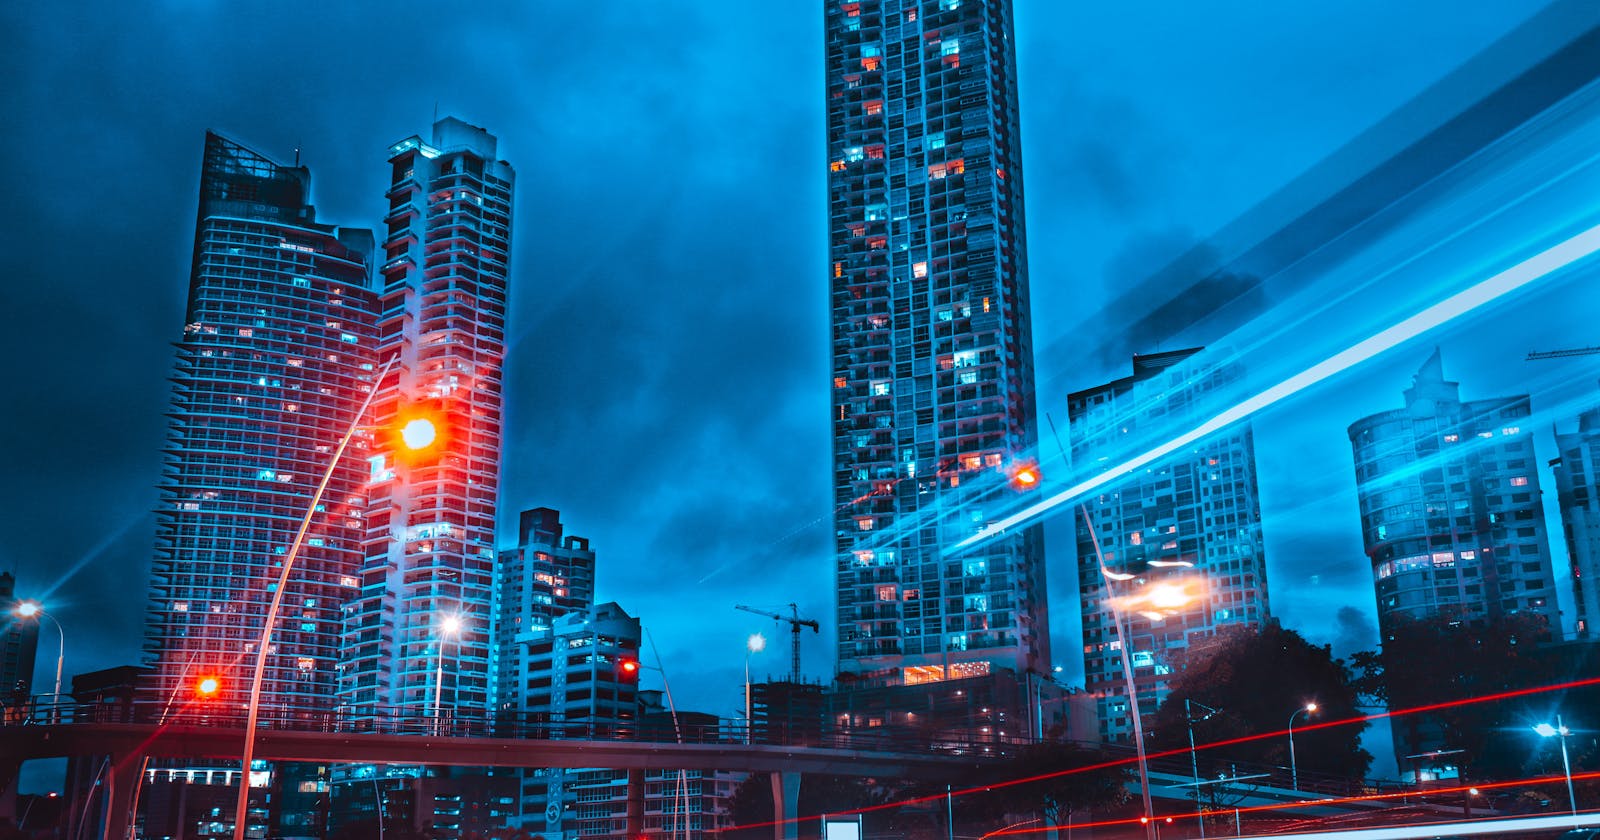 Building the Cities of Tomorrow: The Rise of Smart Cities